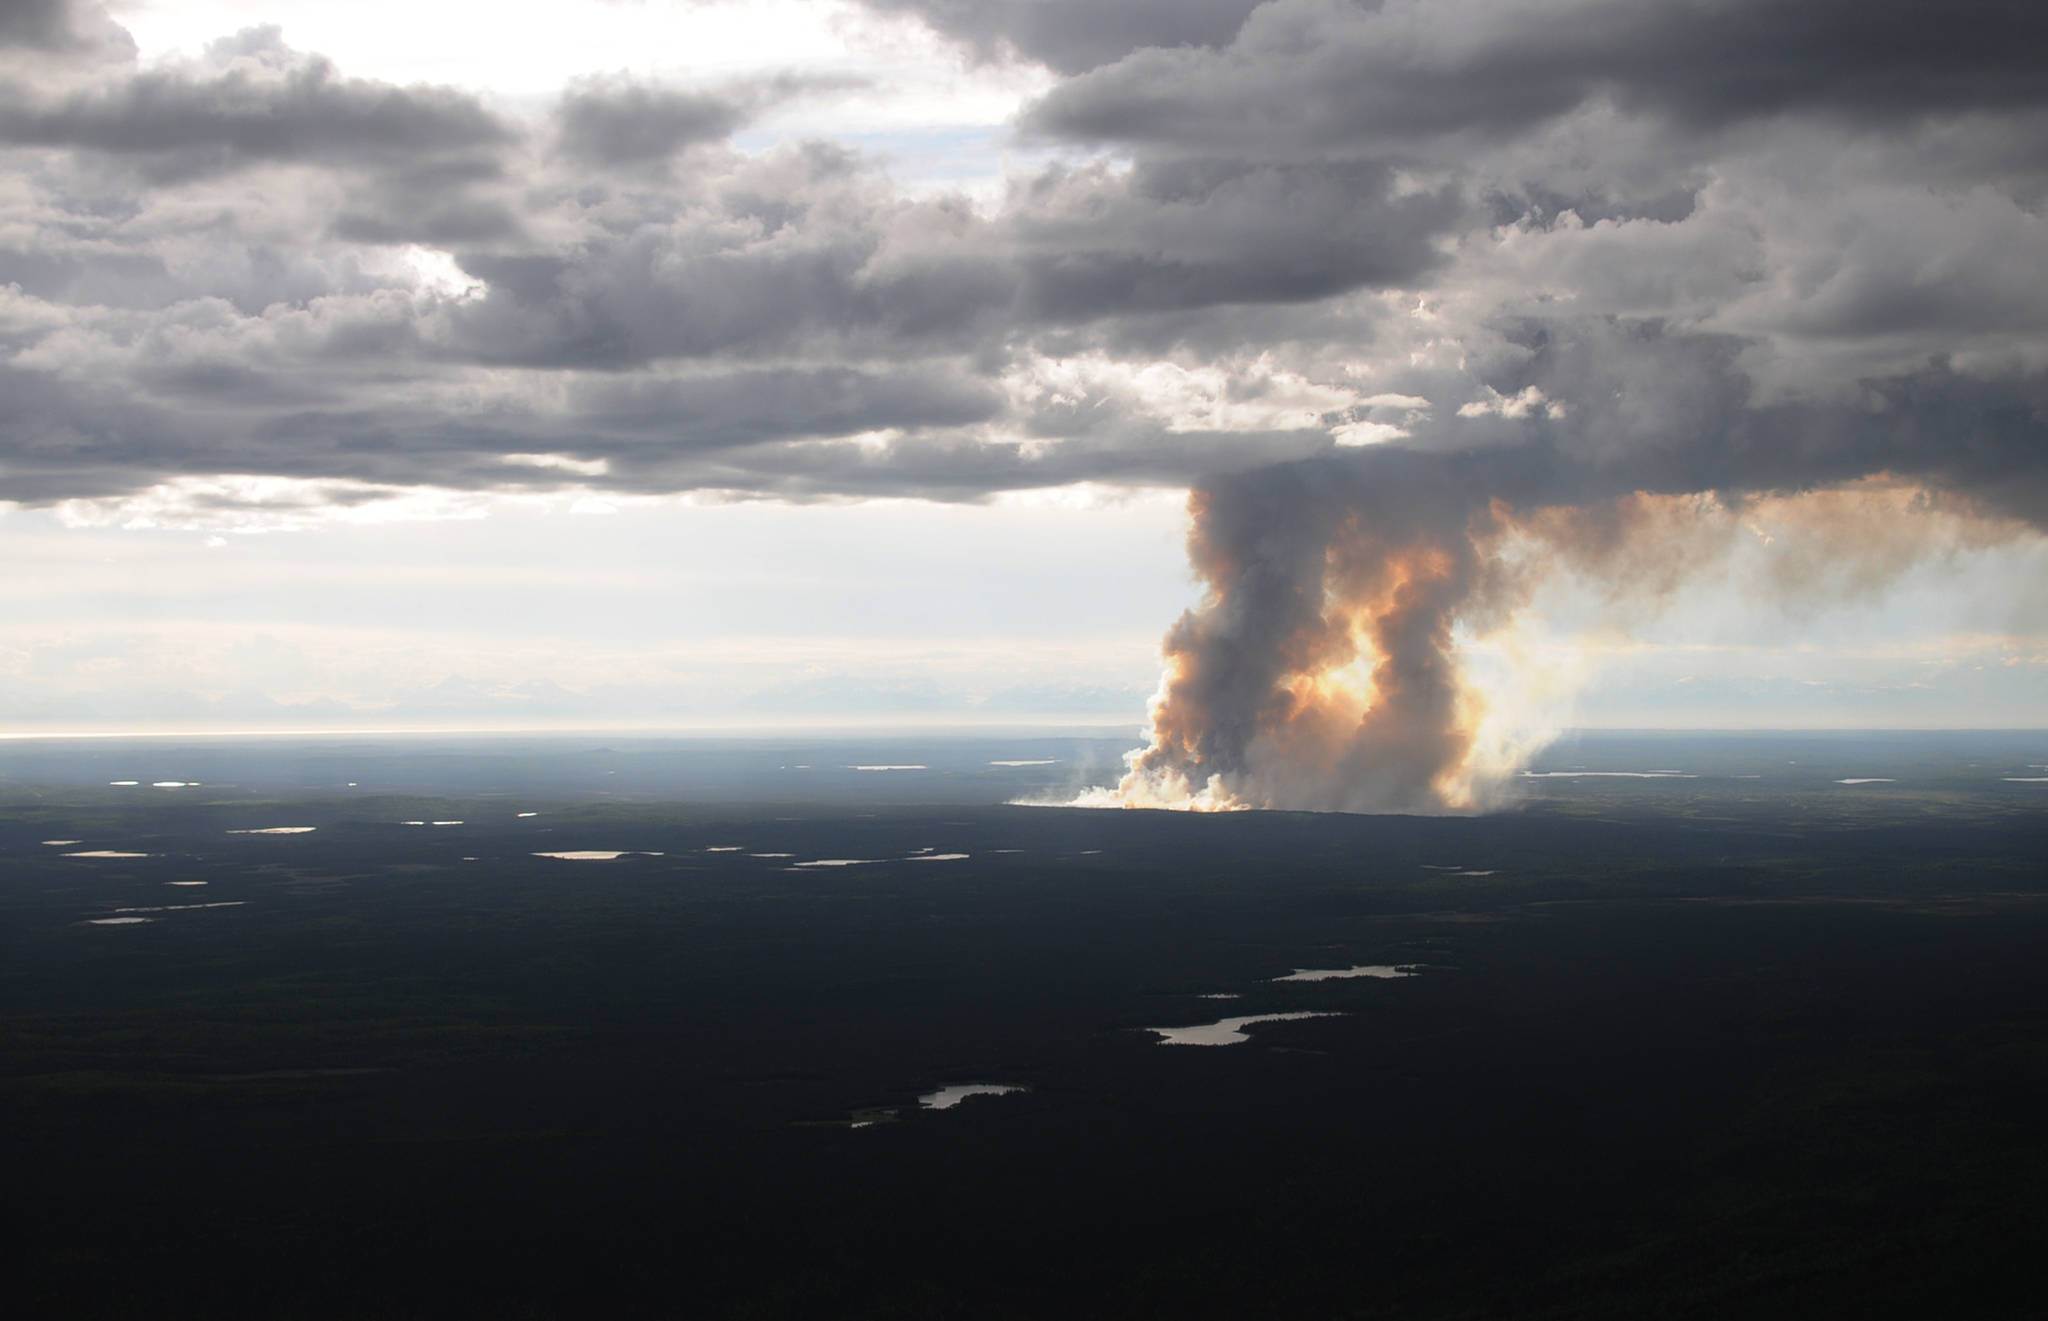 Smoke rises from the burn area of the East Fork Fire on the Kenai National Wildlife Refuge on June 16, 2017 near Sterling, Alaska. The fire, sparked by lightning, rests at 1,016 acres and will be monitored as firefighters pull back their response. (Photo by Elizabeth Earl/Peninsula Clarion)